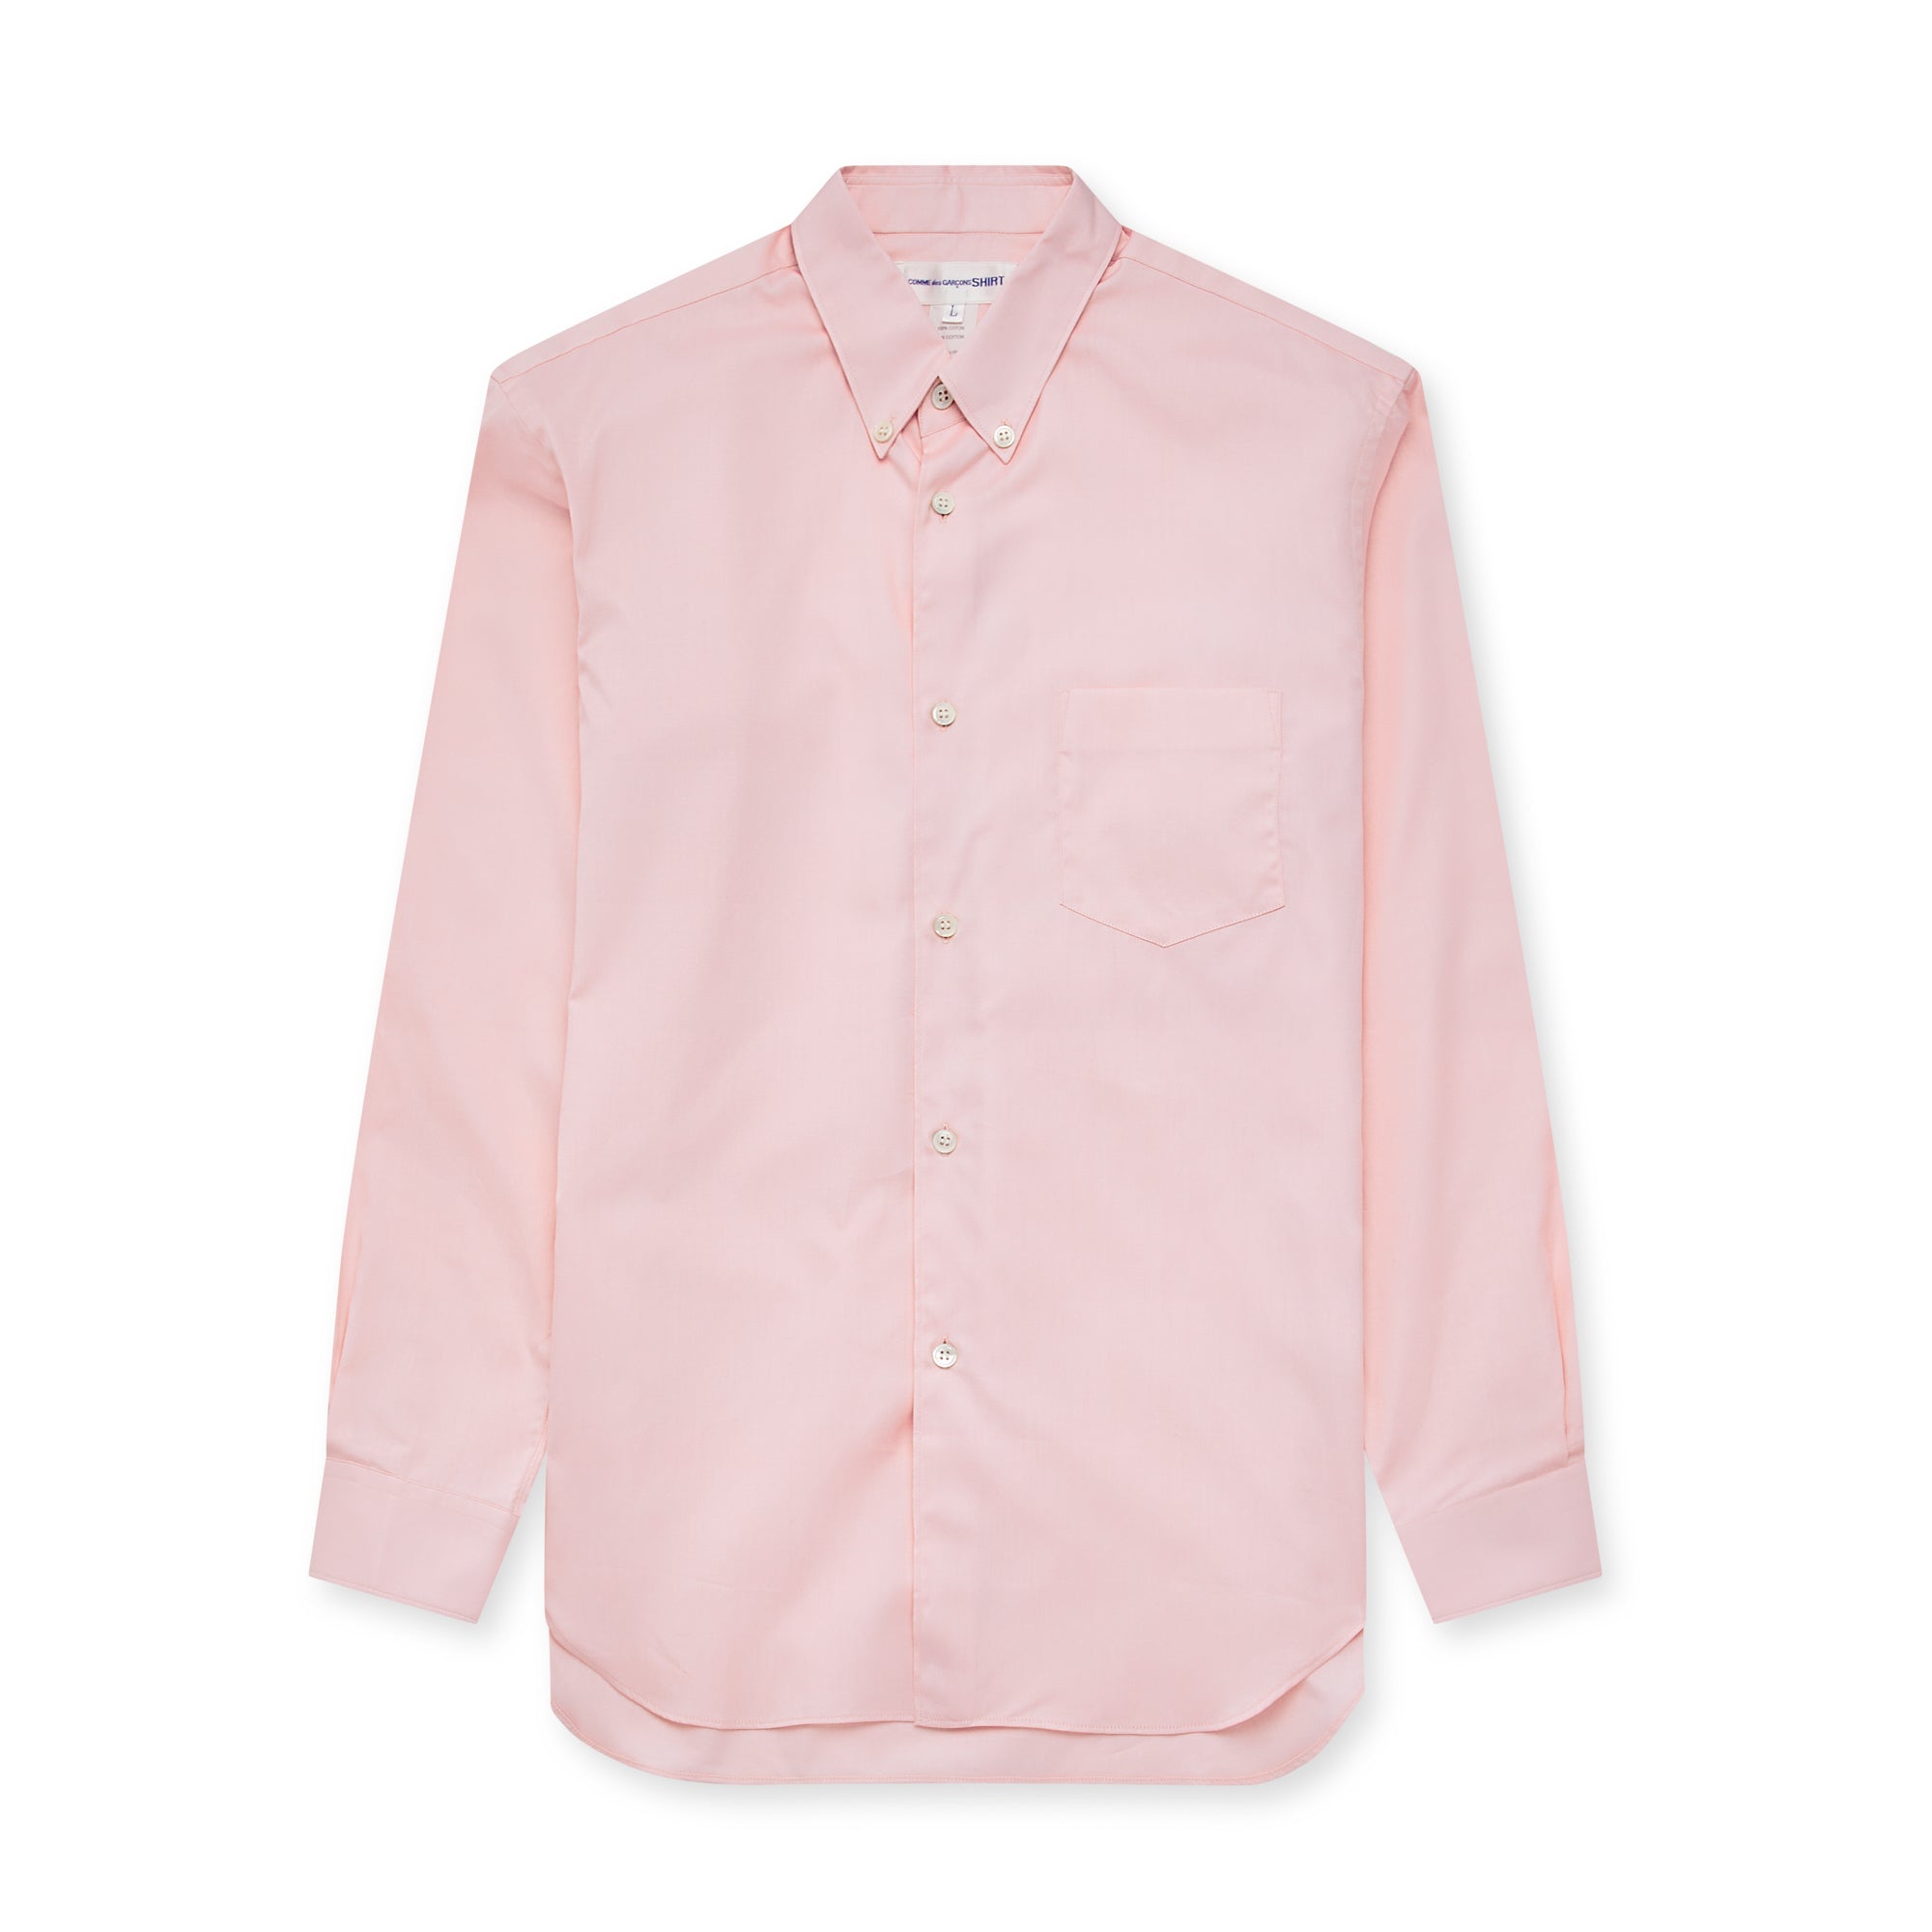 CDG Shirt Forever - Slim Fit Button-Down Cotton Shirt - (Pink) view 1